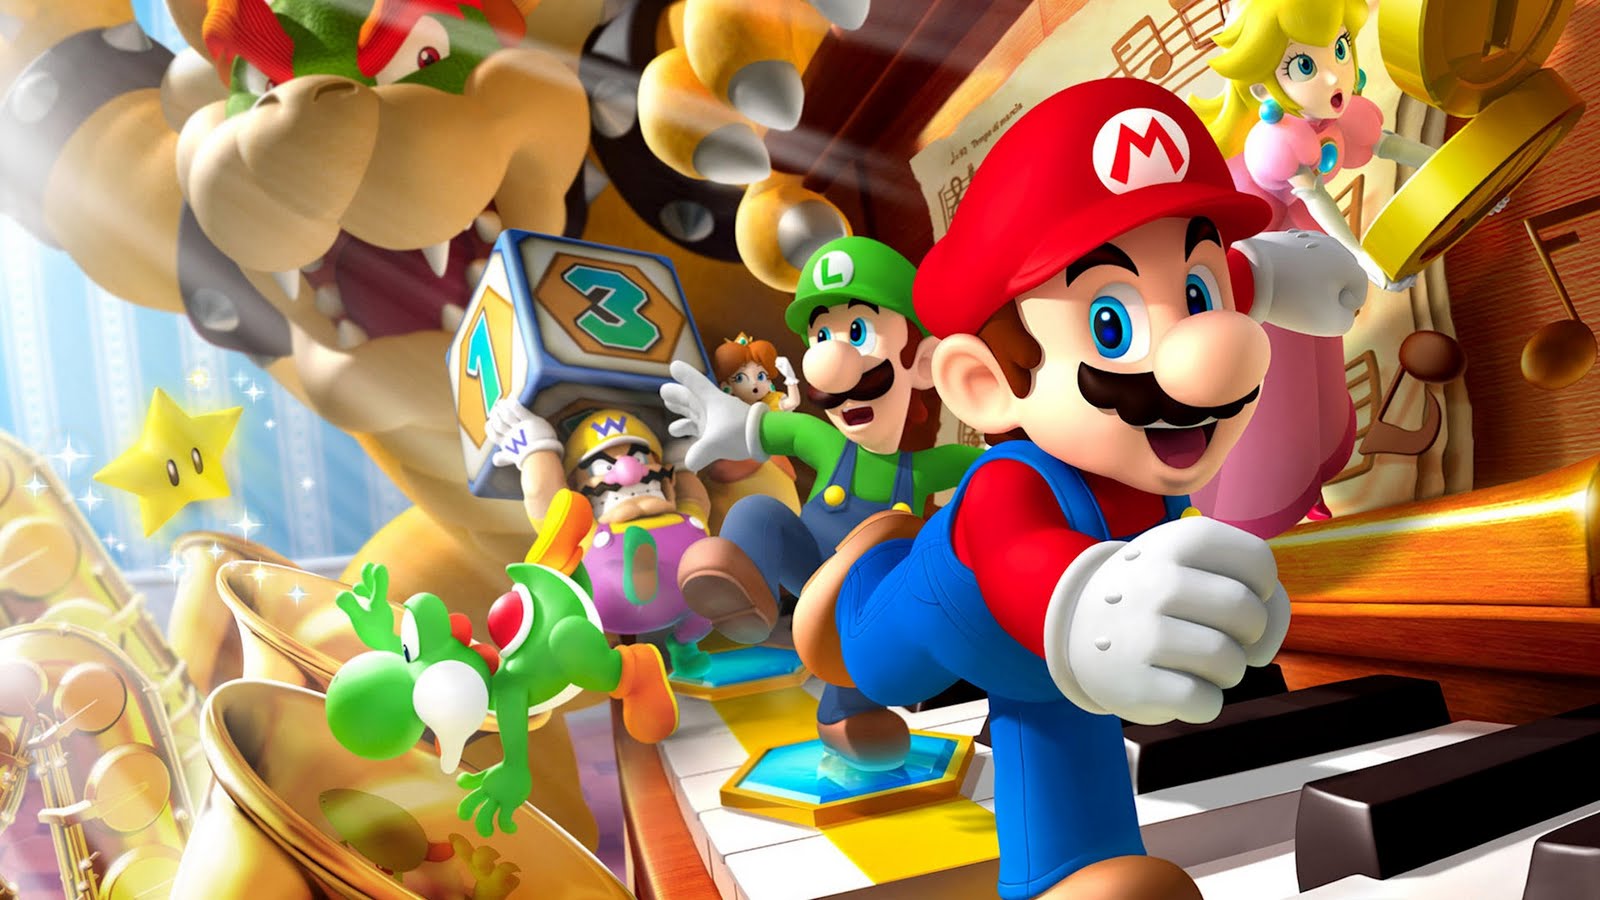 Super Mario background with Mario Luigi and all other characters